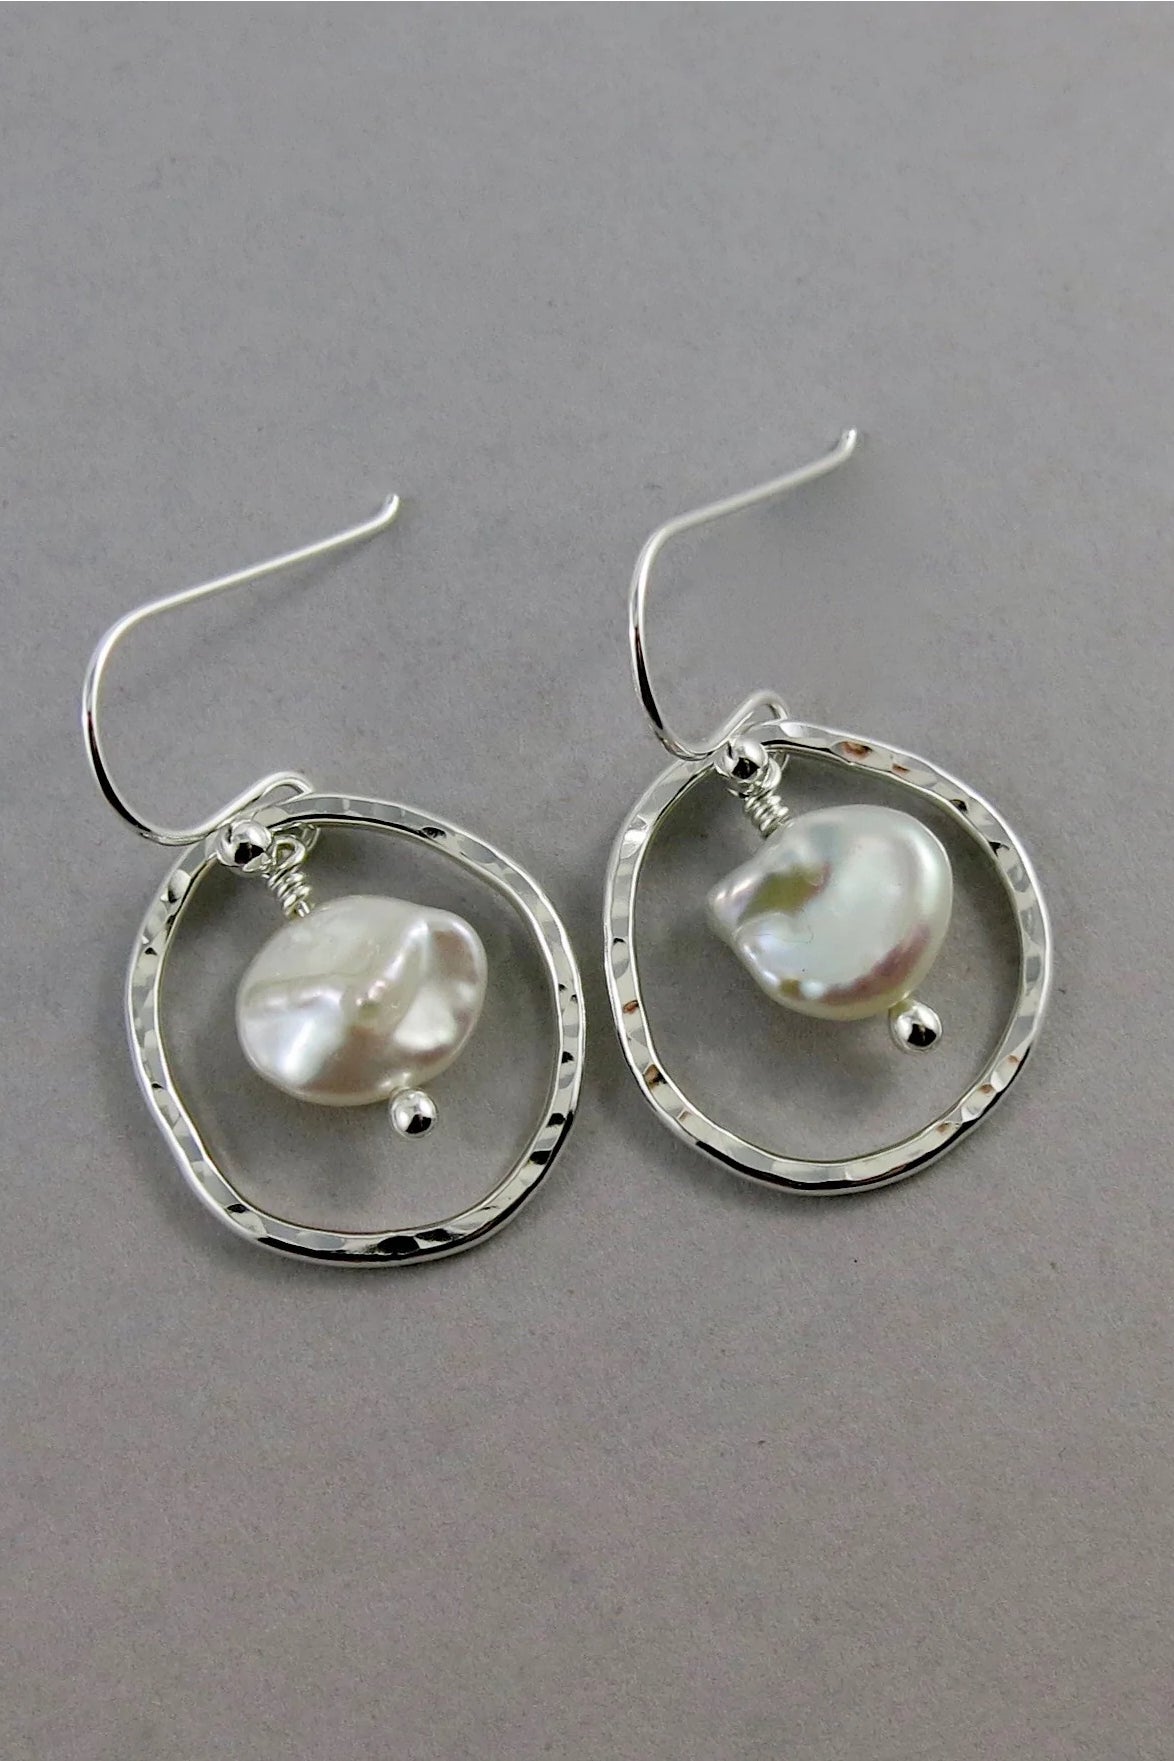 Organic Keshi Pearl Earrings in Sterling Silver by Mikel Grant, made in Sechelt BC